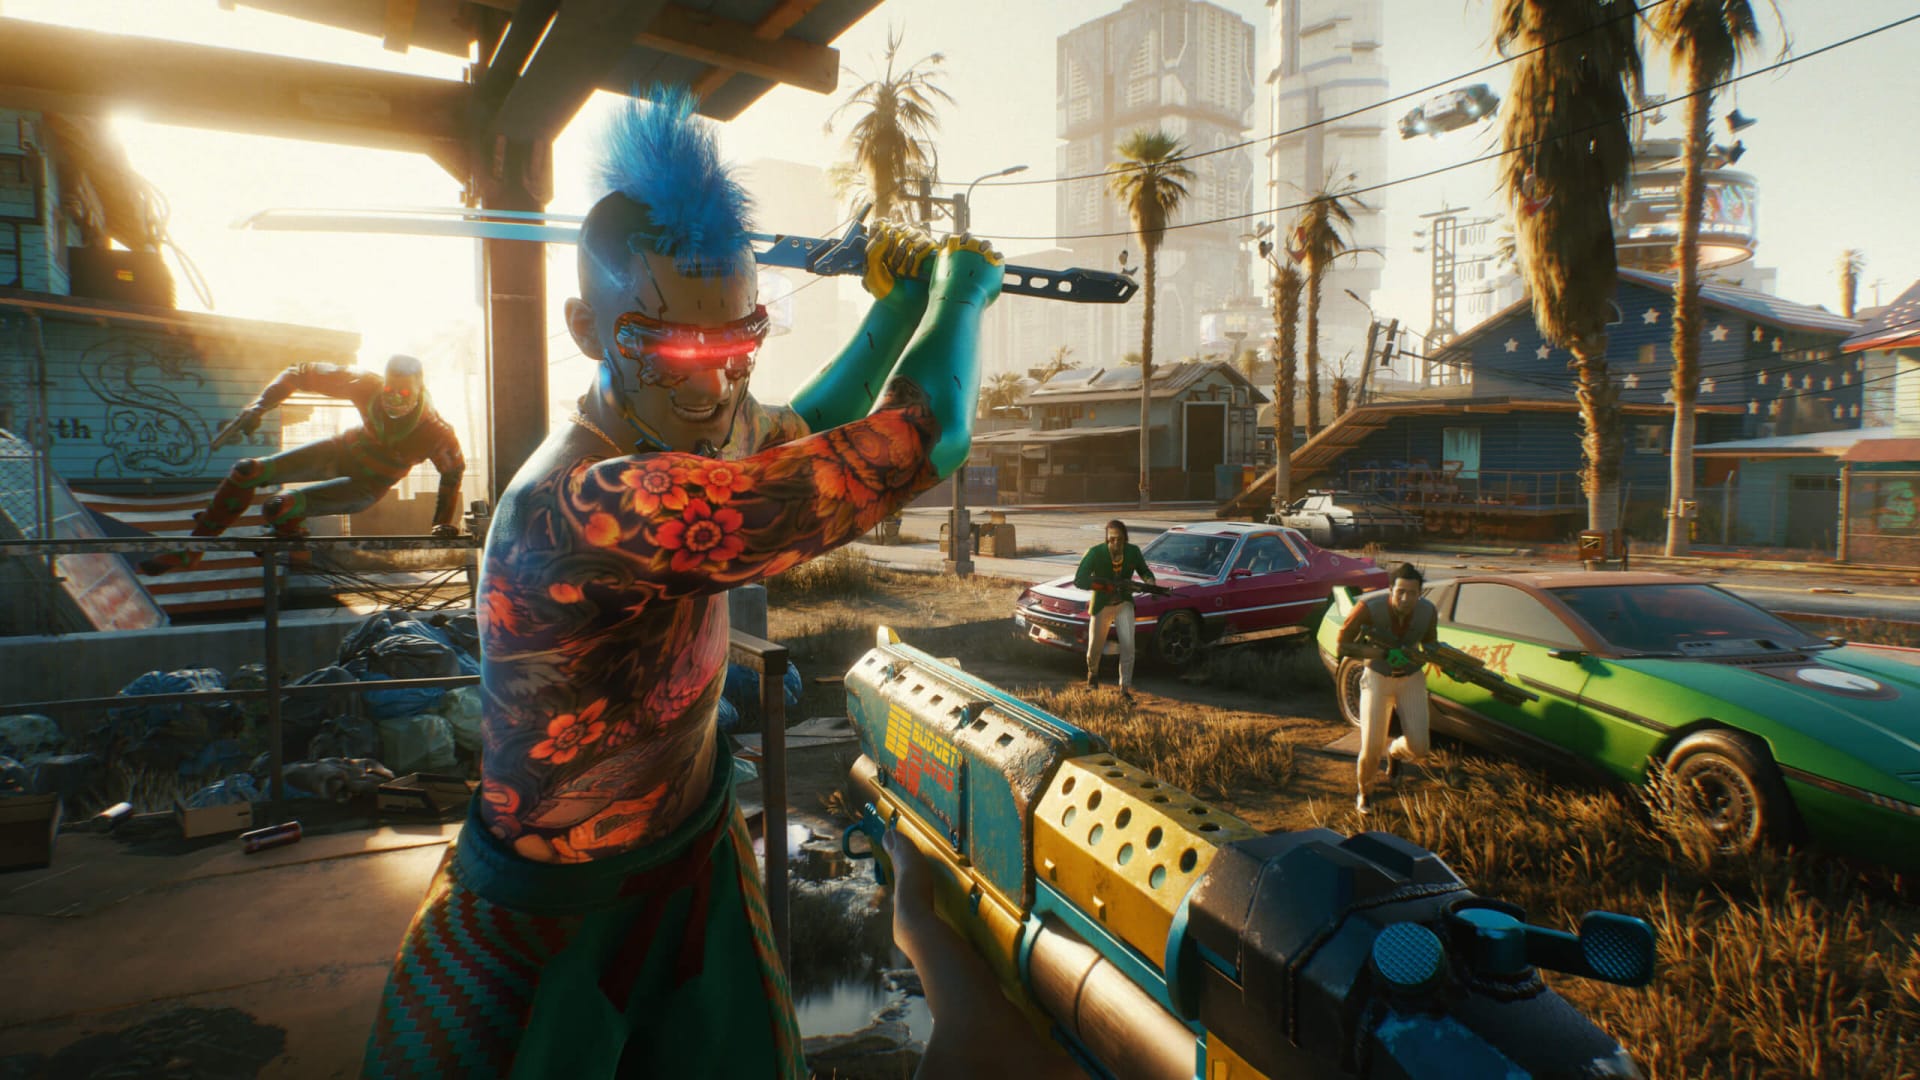 Cyberpunk 2077 gets 'Ray Tracing: Overdrive Mode' in latest patch